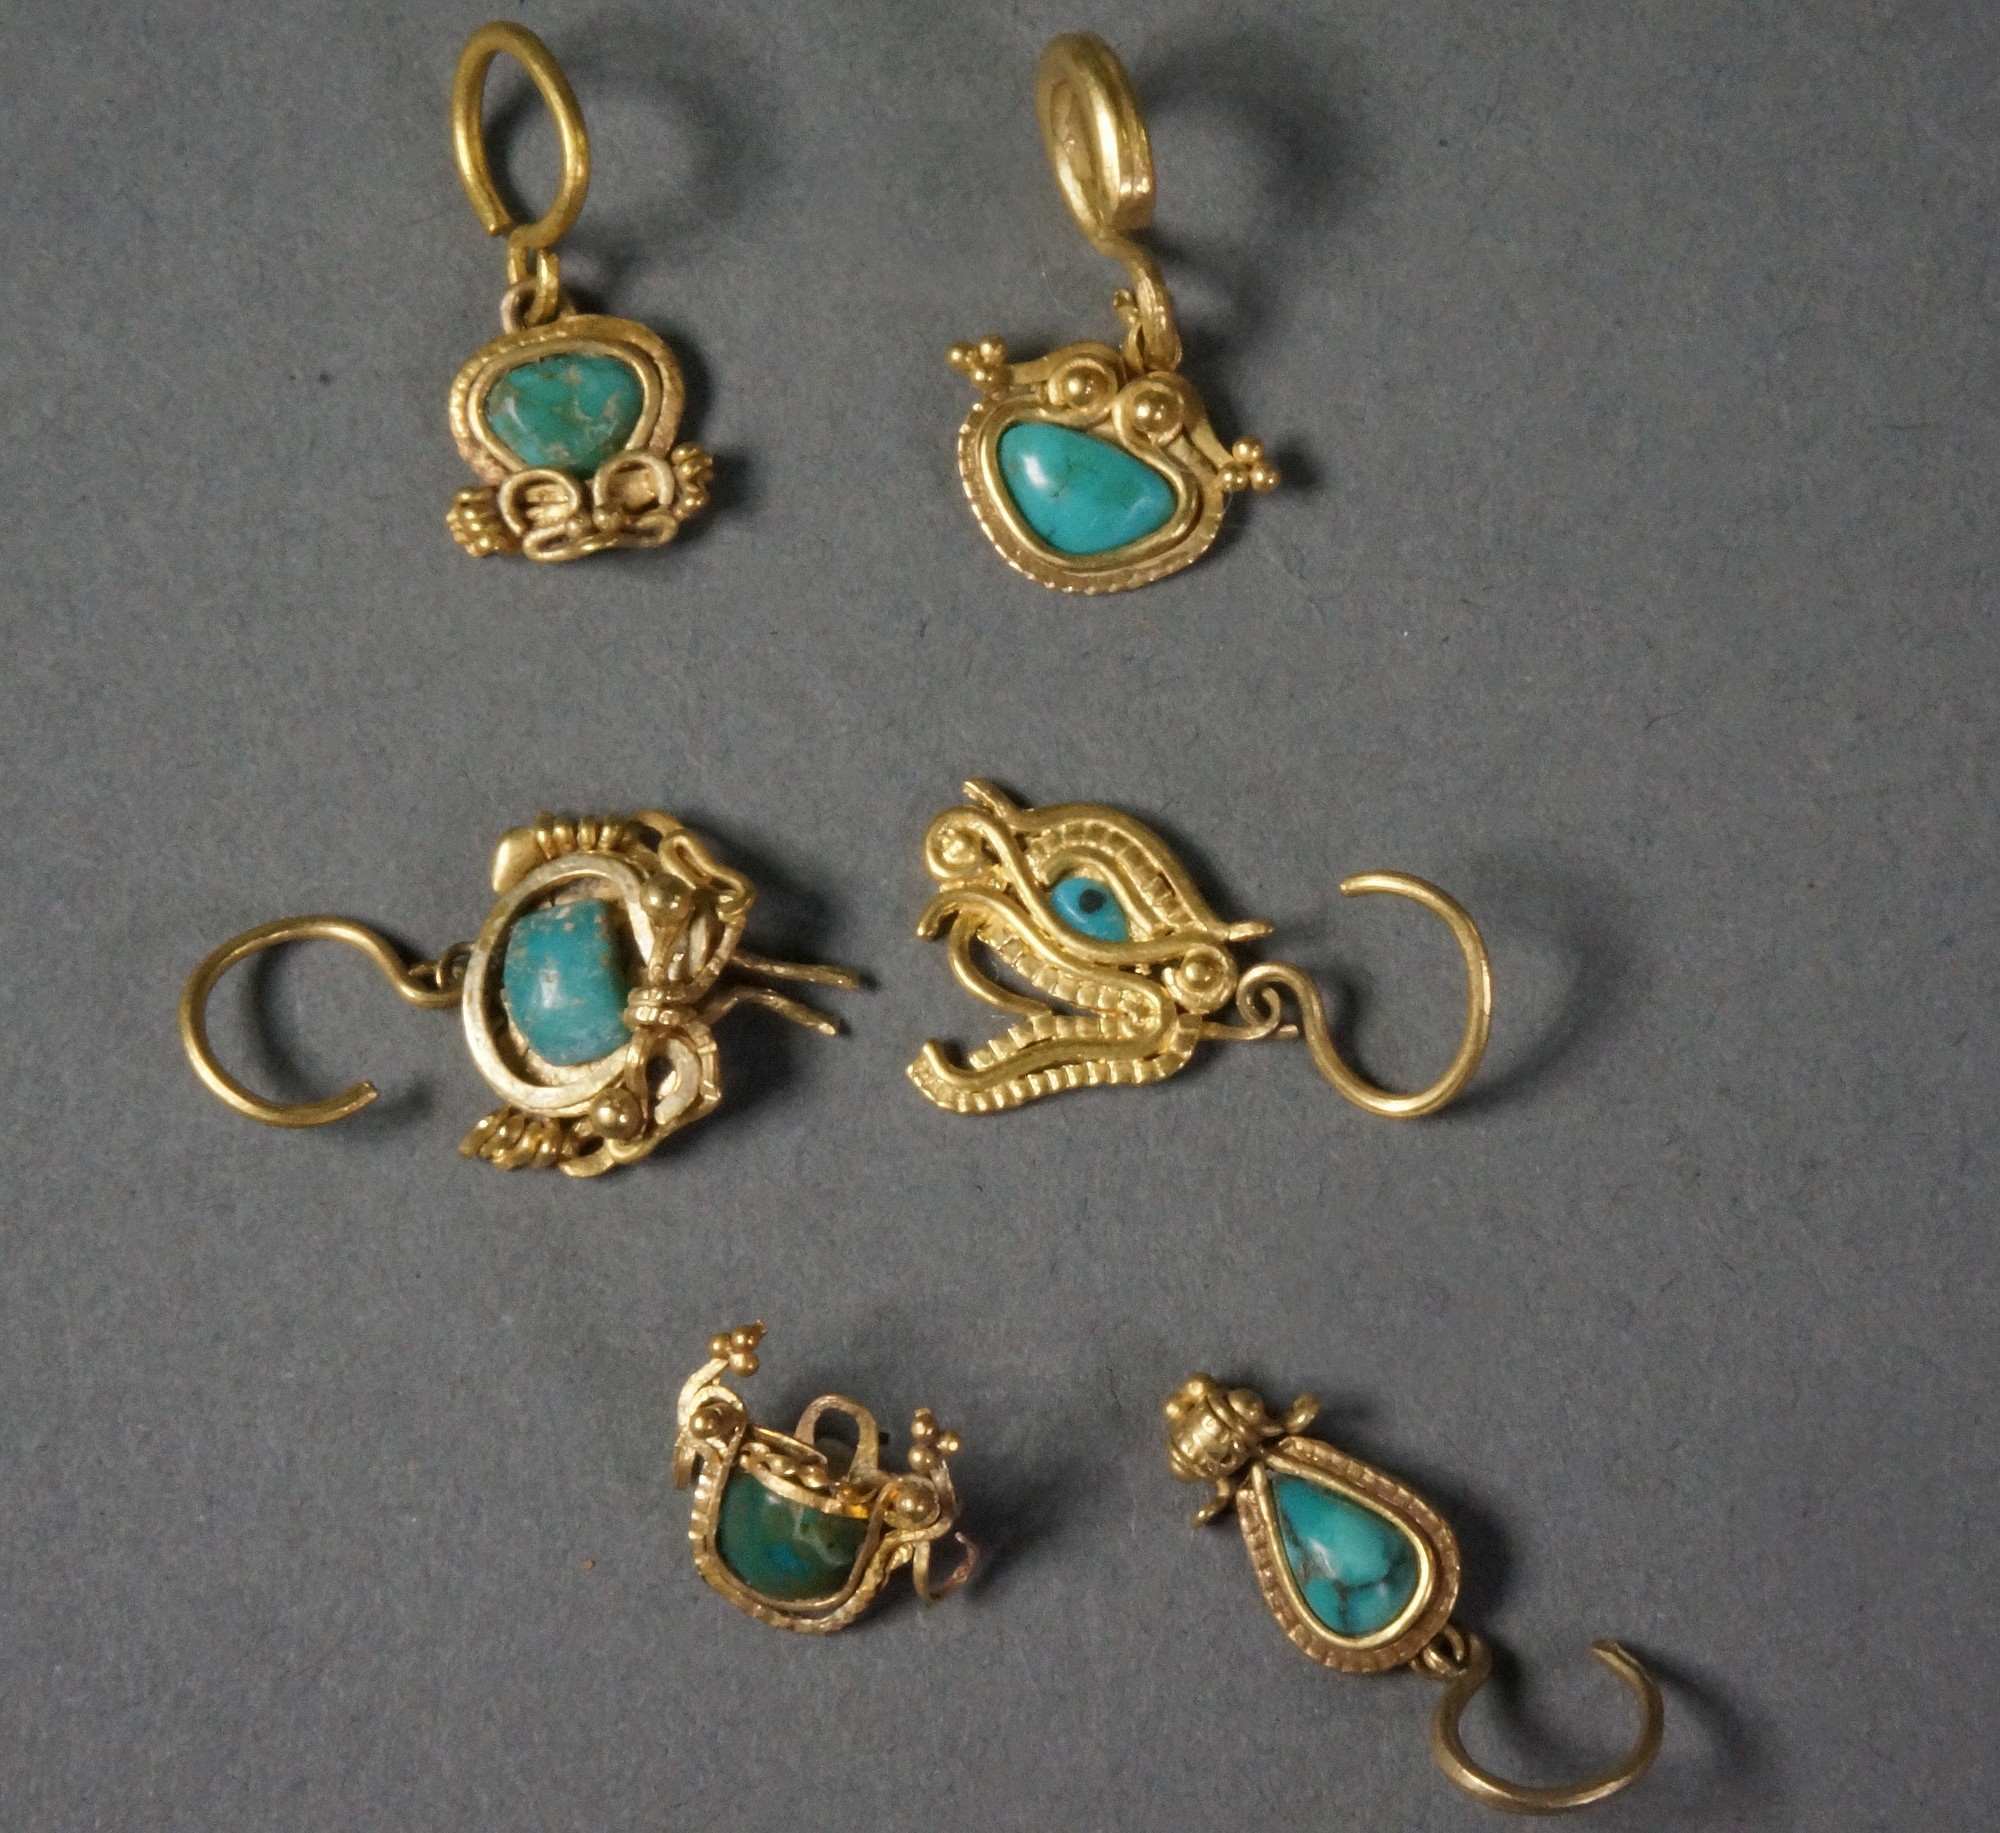 Ecuador, Six La Tolita Gold with Platinium Miniature Ear Ornaments with Turquoise
Each item has a suspension ring for ear ornaments.  These are excellent examples of early granulation technique.   Similar examples are illustrated in "The Gold of El Dorado," figure 506, and "Charms in pre-Columbian Ecuador," page 27.
Media: Metal
Dimensions: approx 1"each
$5,600
94203